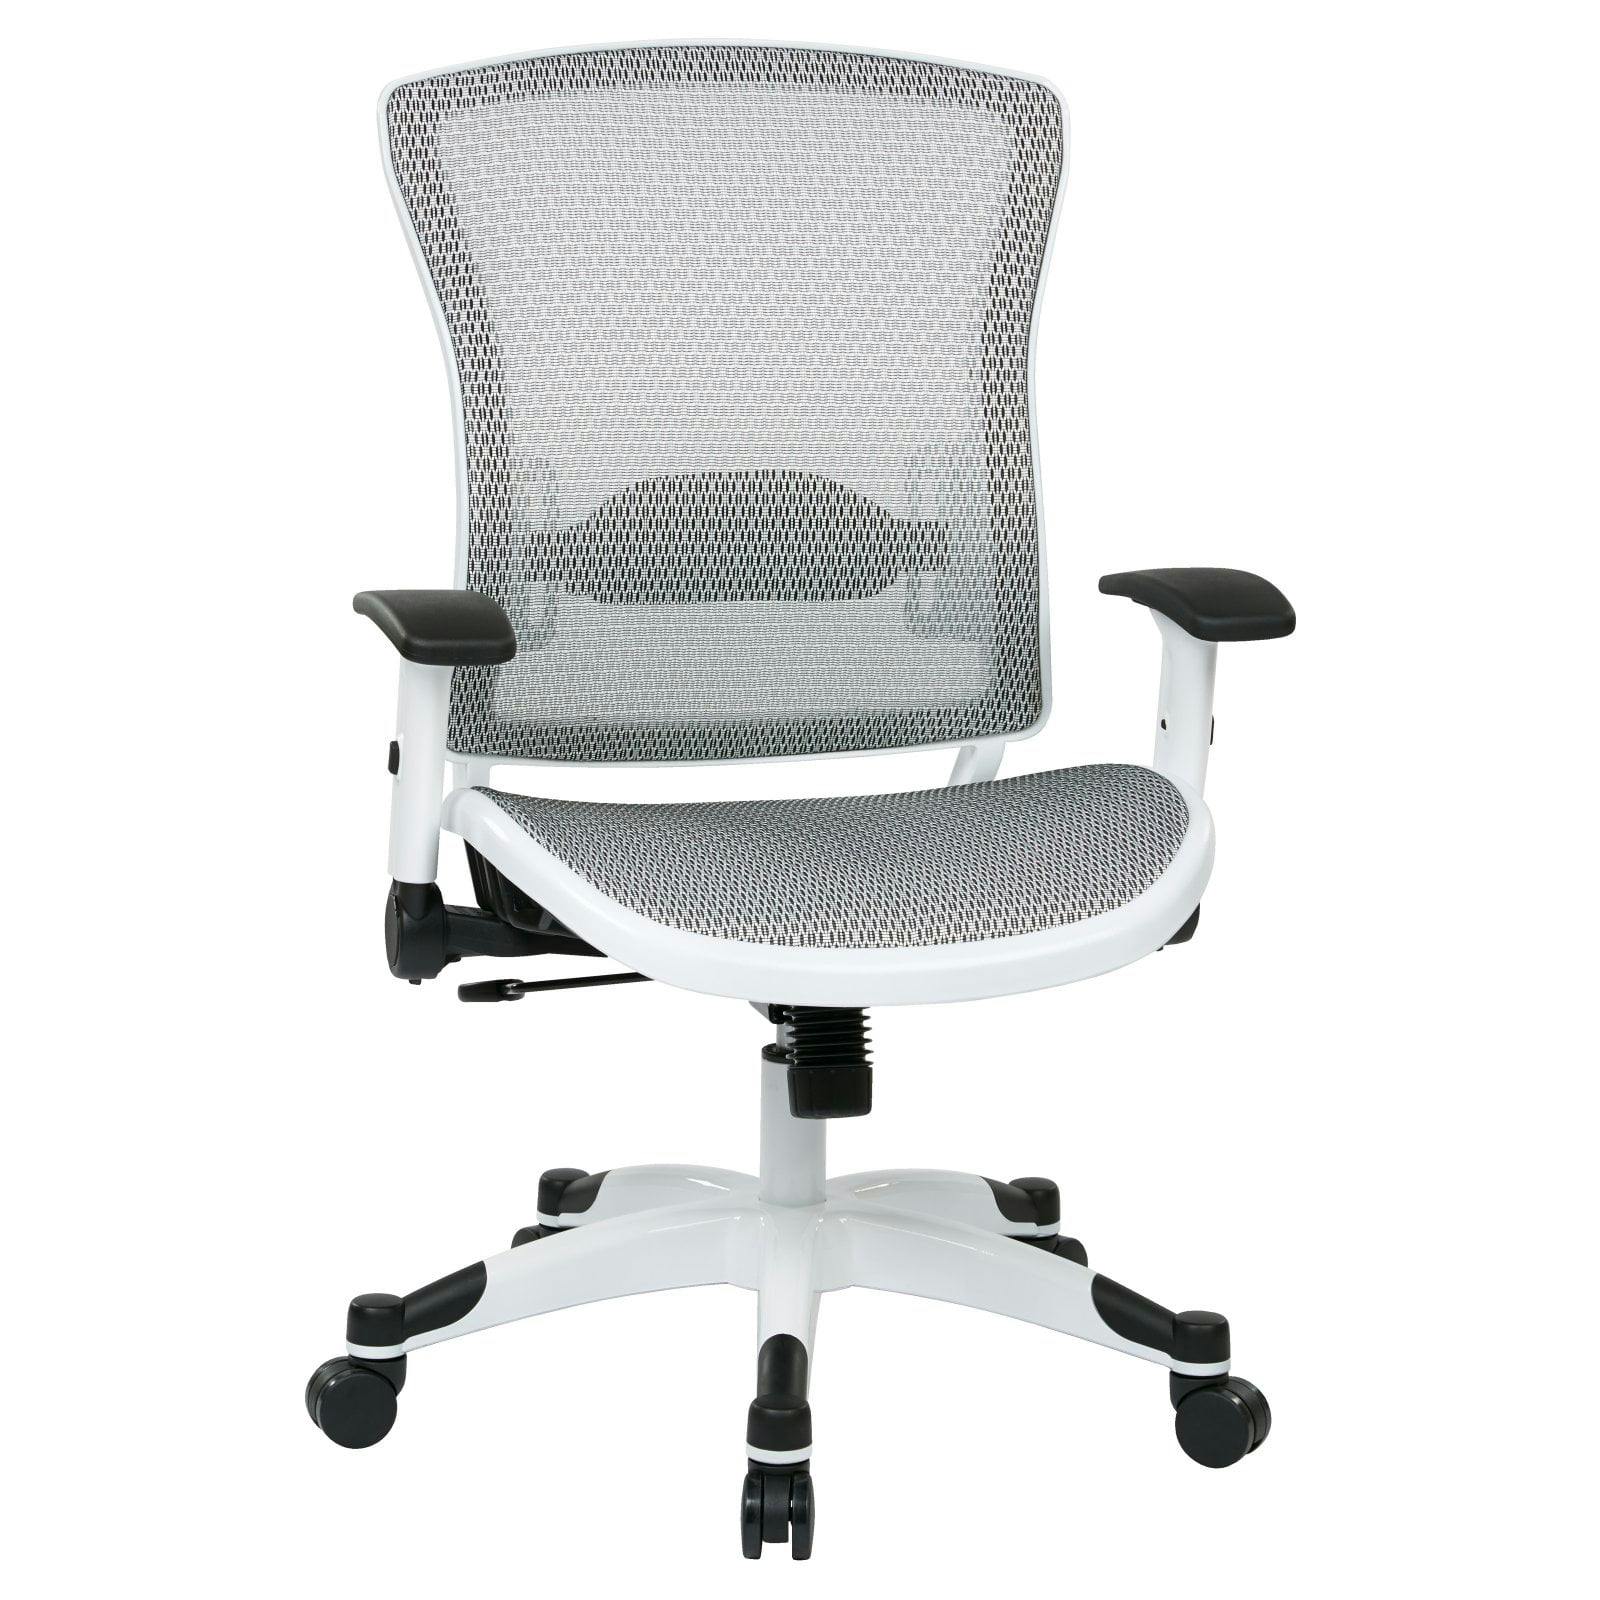 Ergonomic White Mesh Manager's Chair with Adjustable Lumbar Support